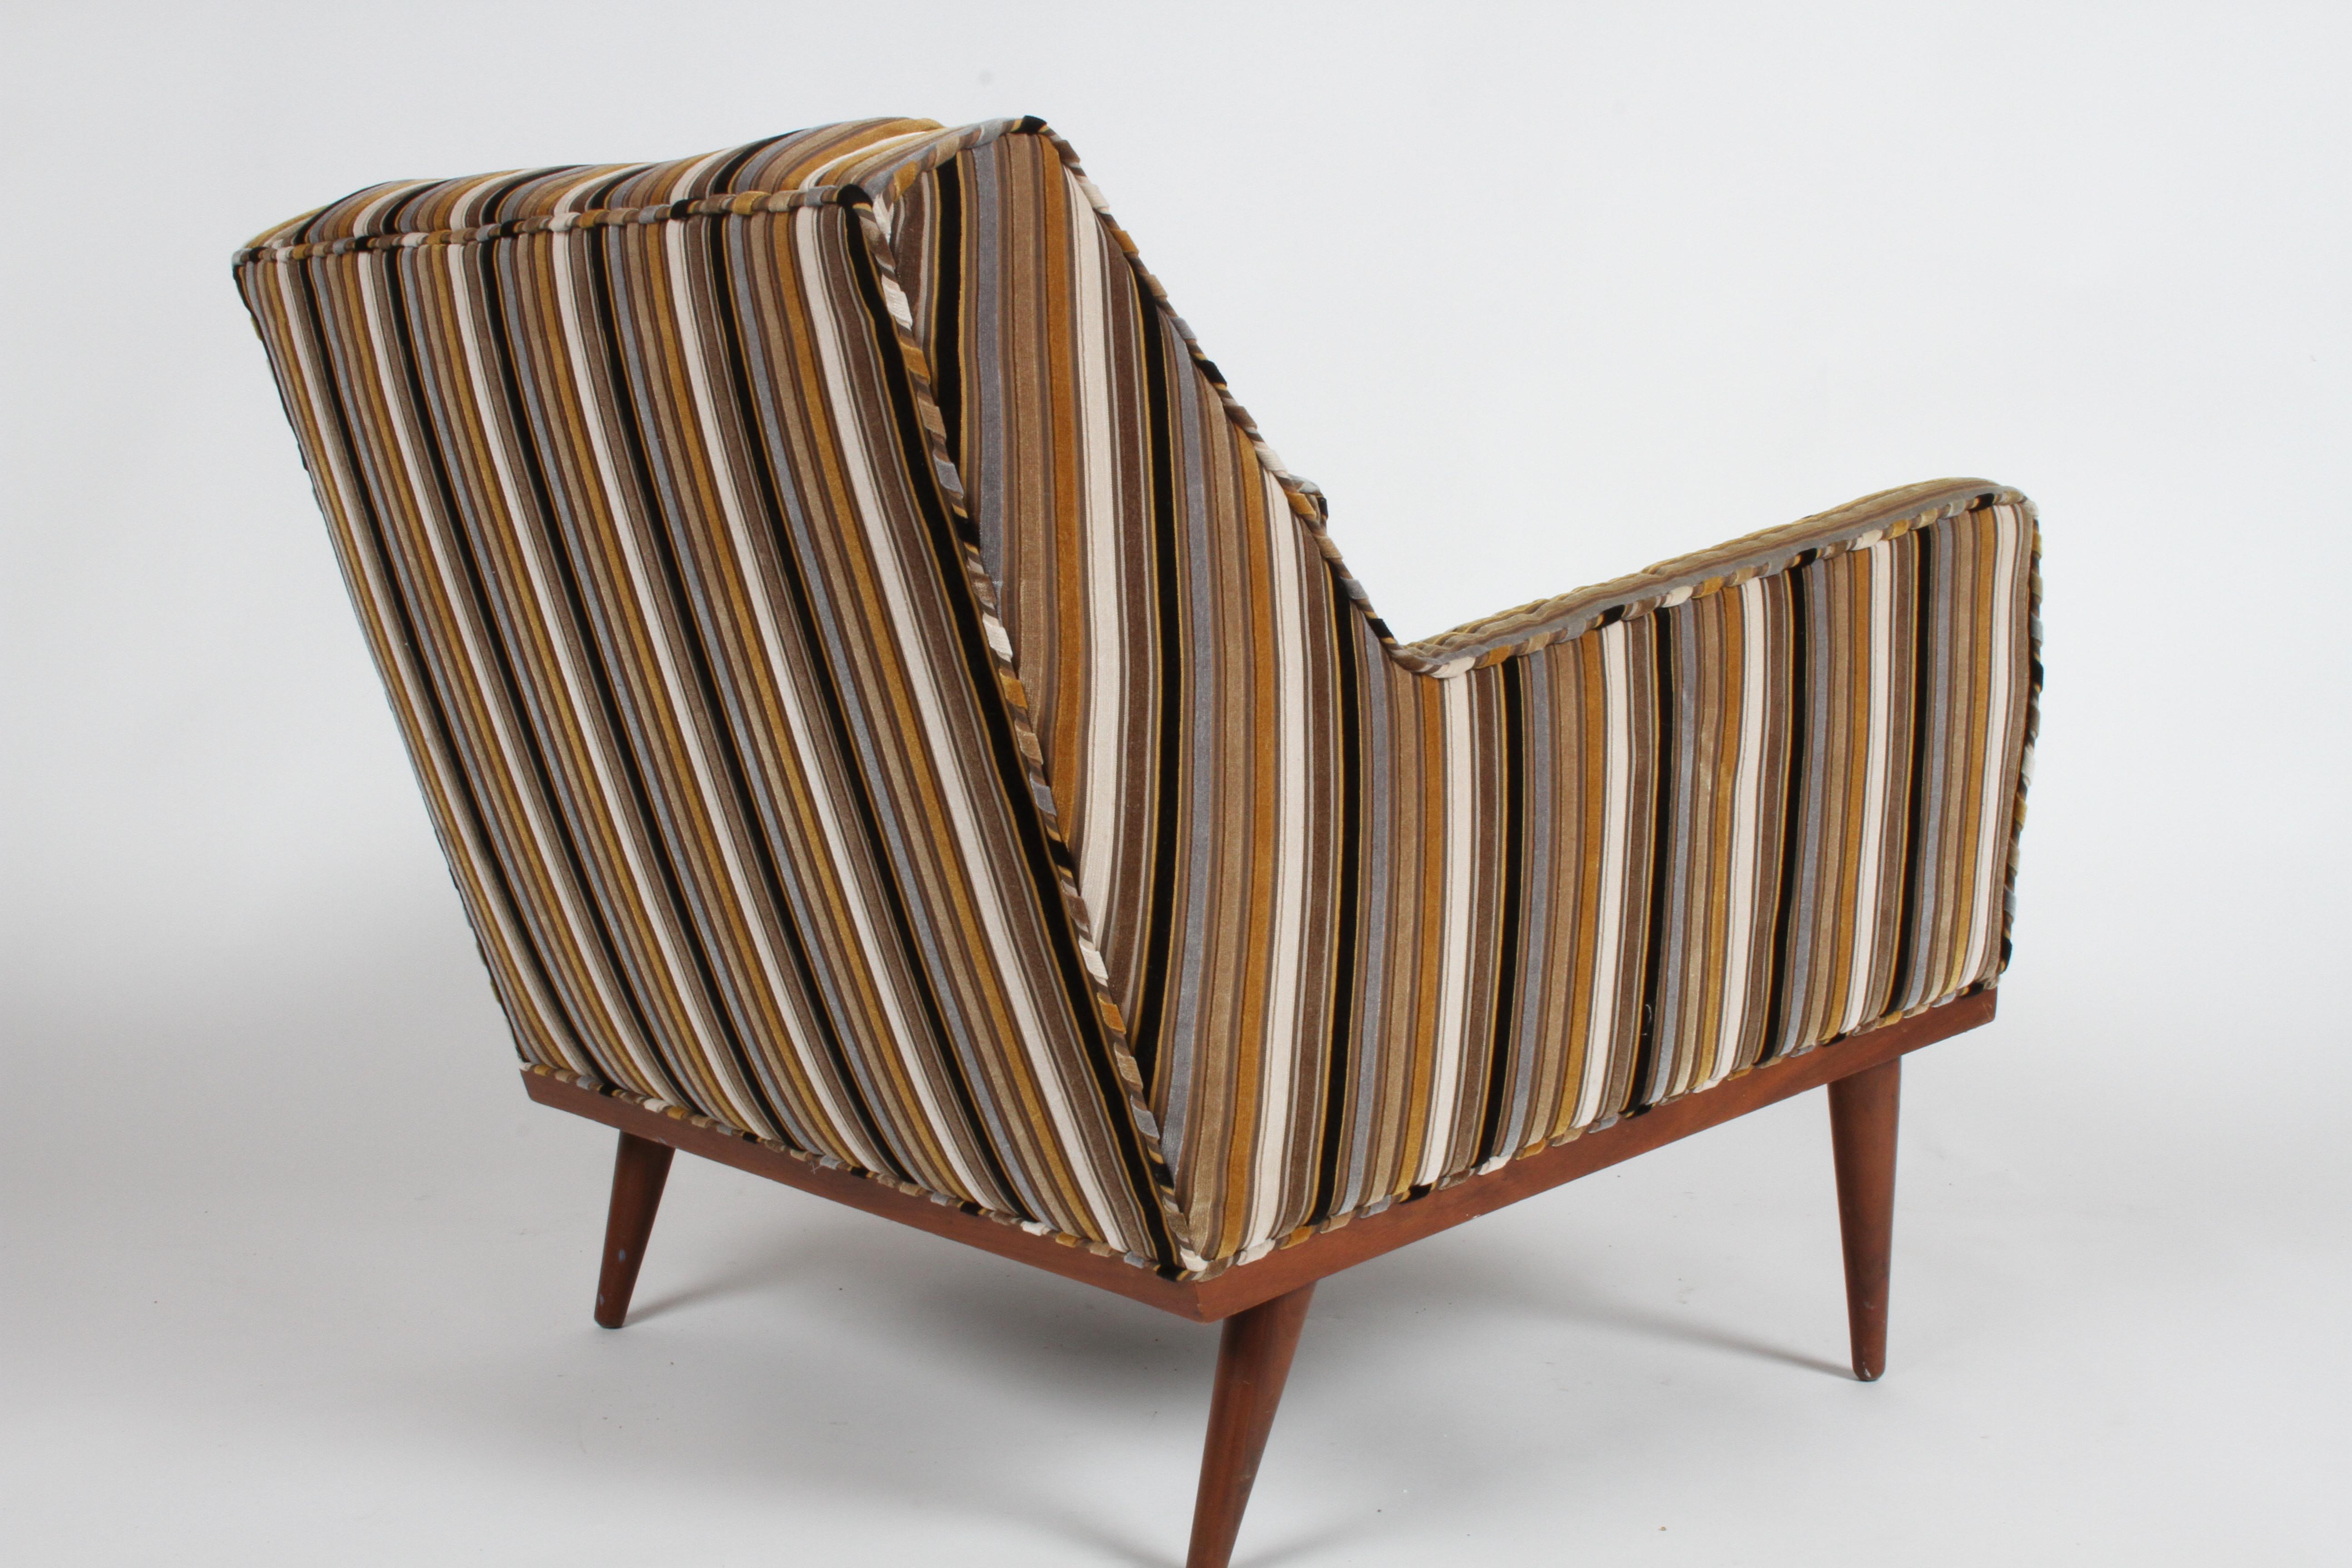 Stained Milo Baughman for James Inc. Lounge Chair